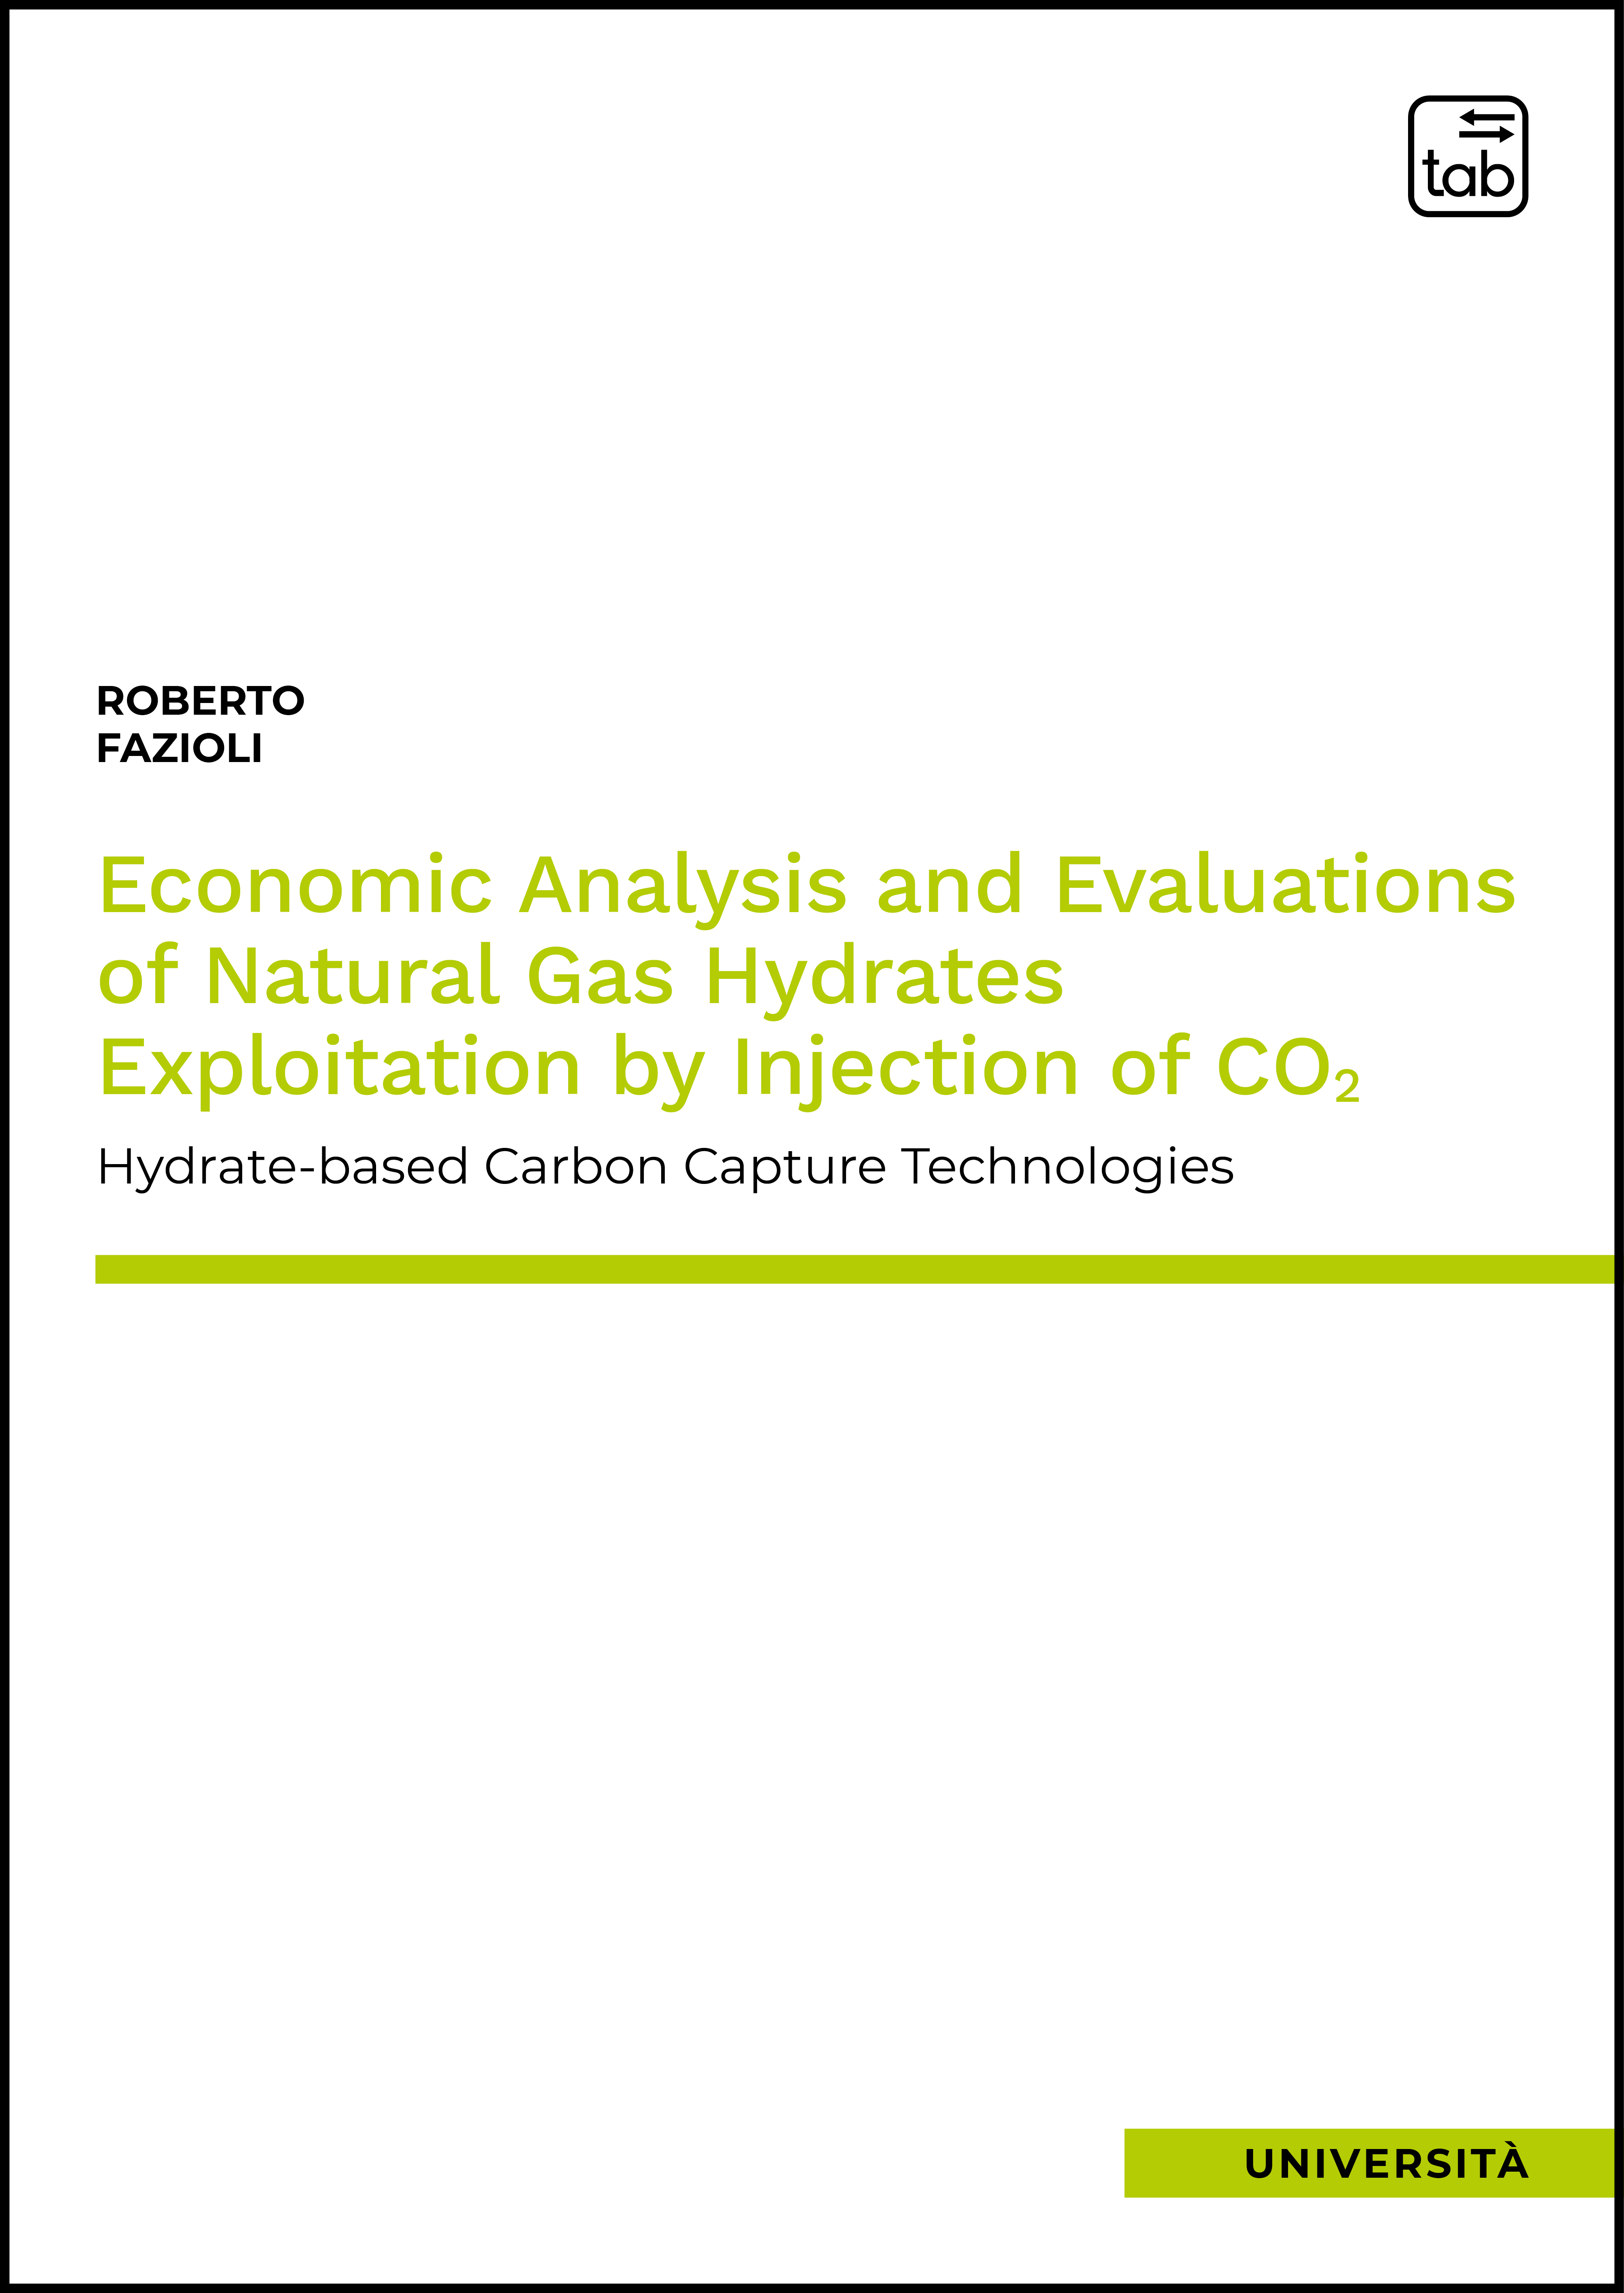 Economic Analysis and Evaluations of Natural Gas Hydrates Exploitation by Injection of CO2